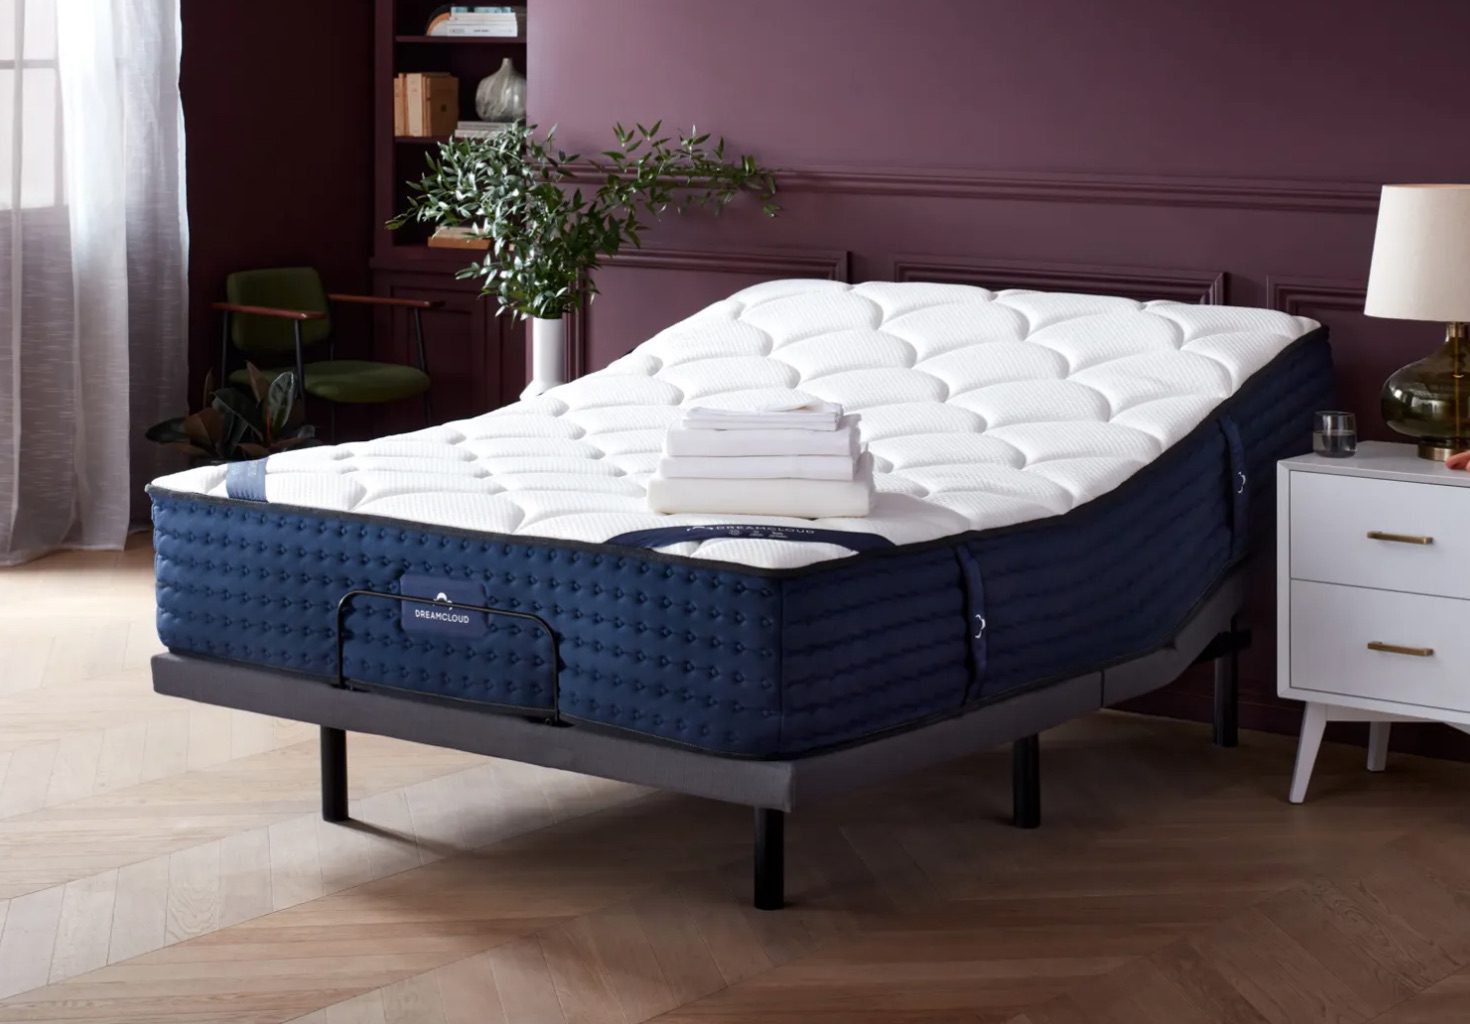 Product page photo of the DreamCloud Adjustable Bed Frame